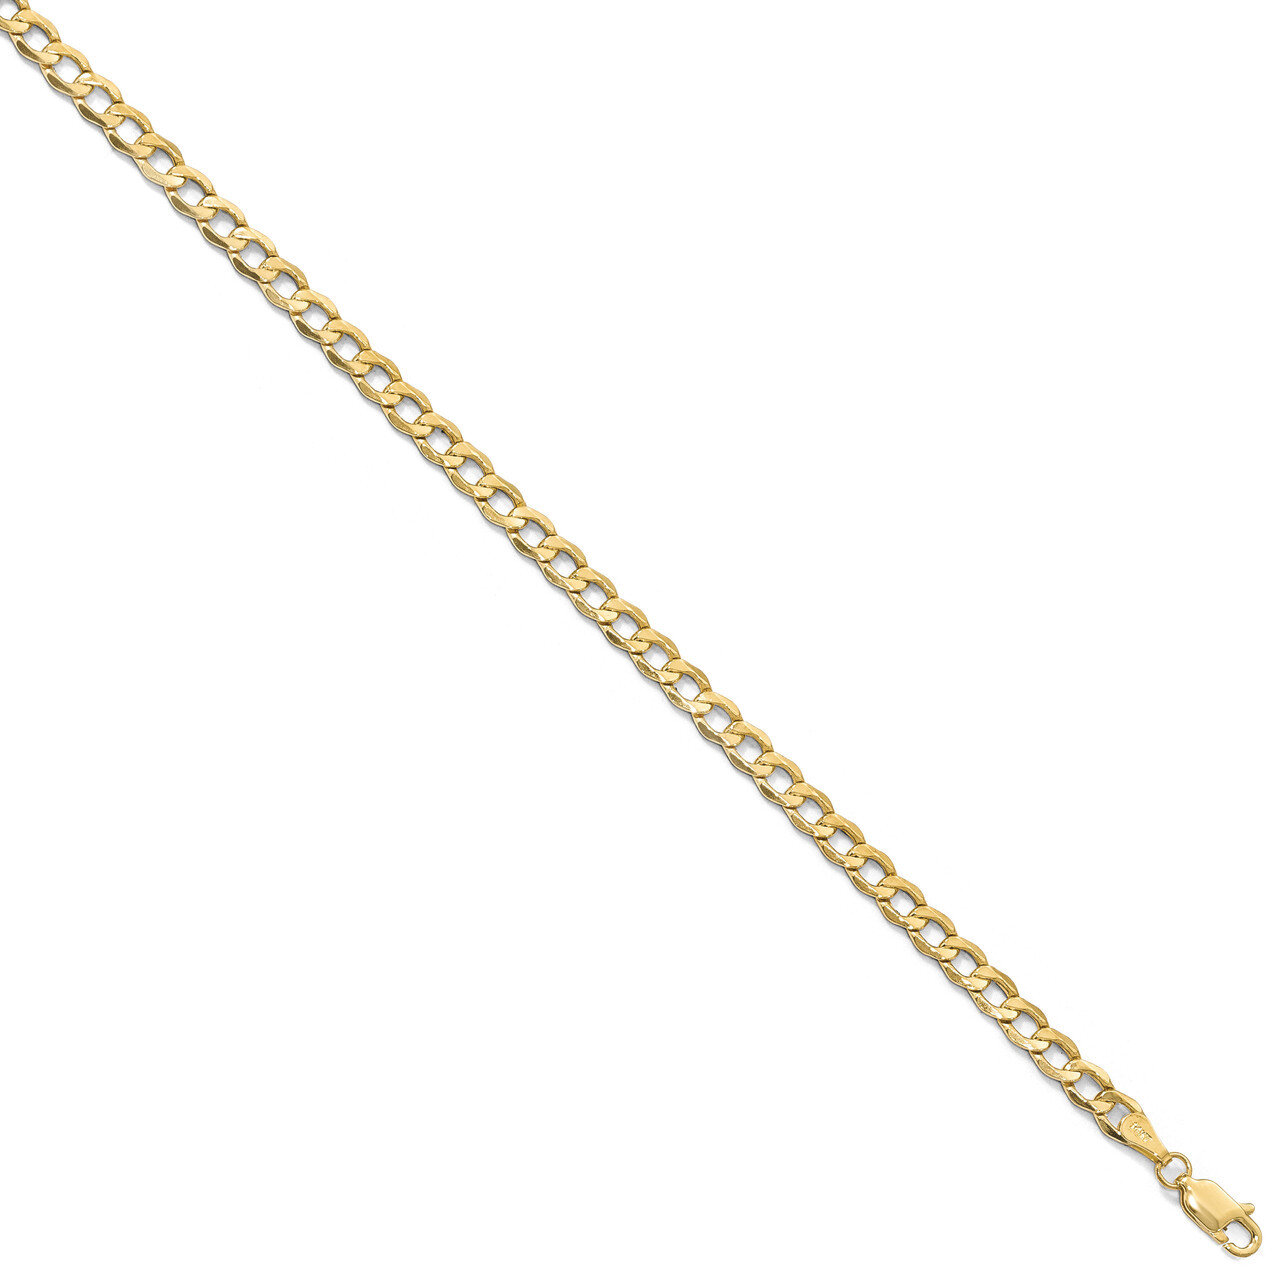 4.3mm Semi-Solid Curb Link Chain 24 Inch 10k Gold HB-8240-24